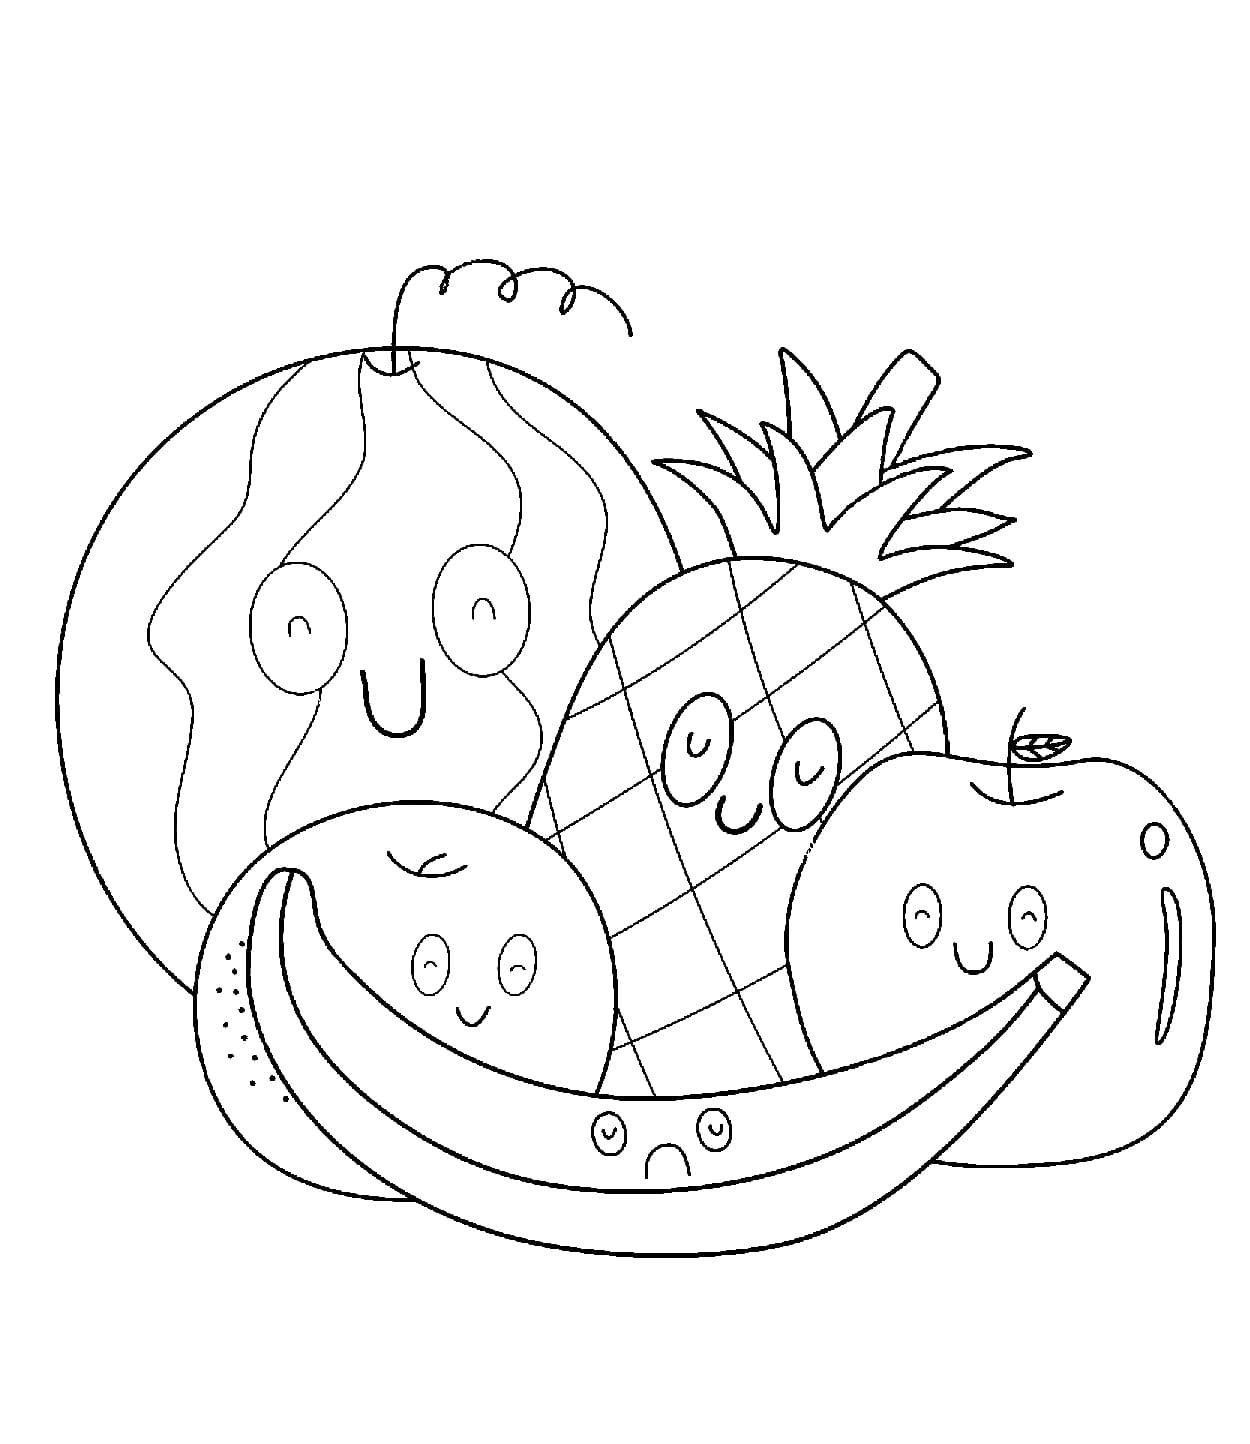 Watermelon coloring pages - Free coloring pages | WONDER DAY — Coloring  pages for children and adults